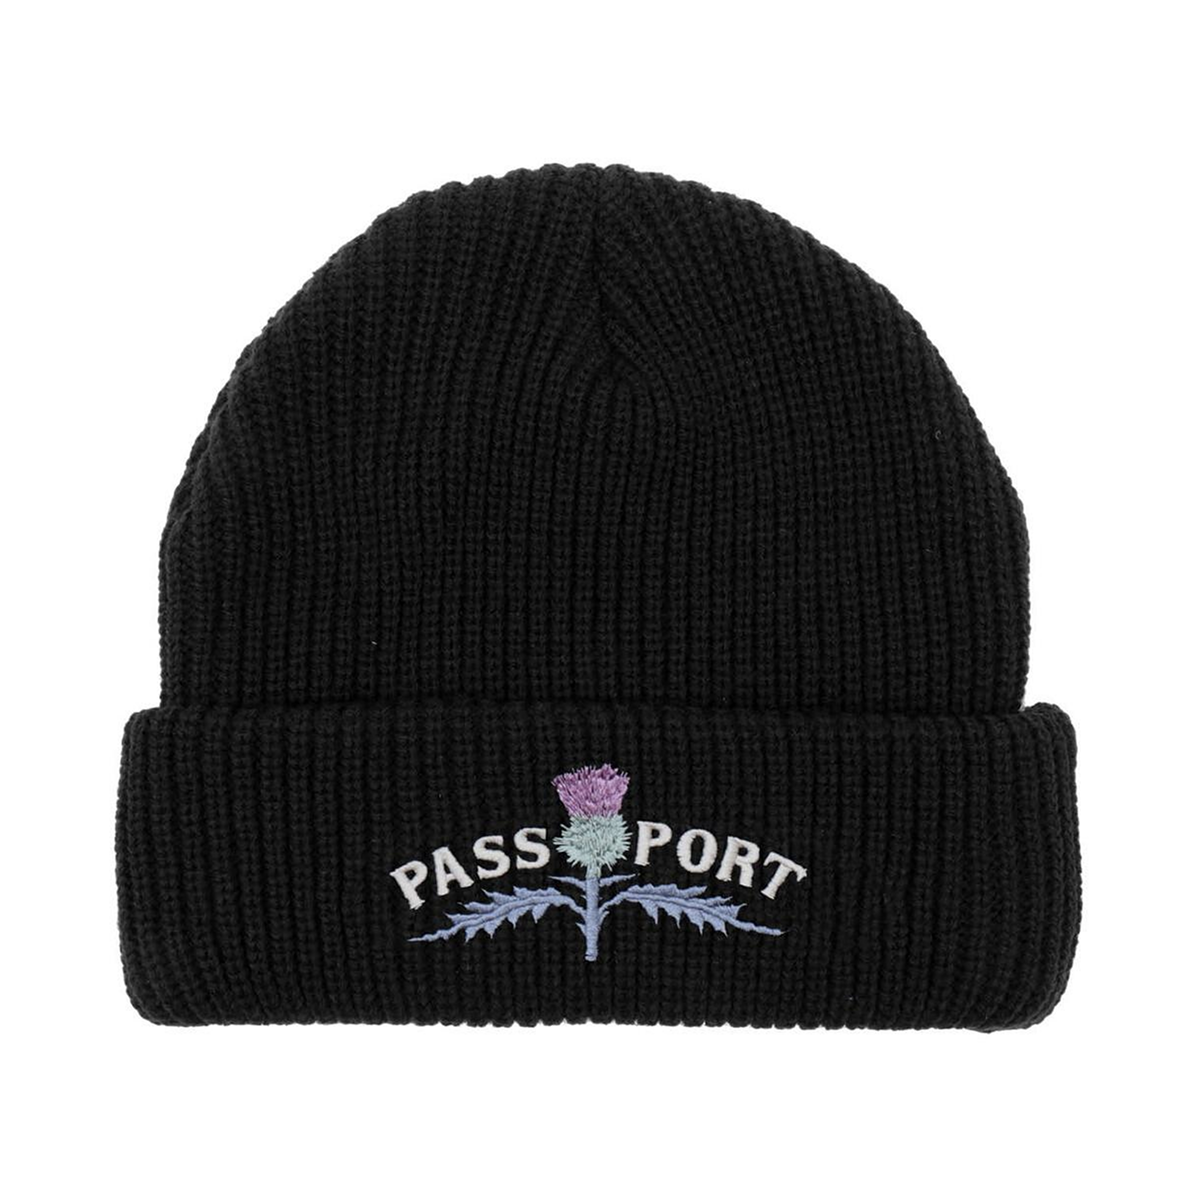 Passport Thistle Beanie - Assorted Colors